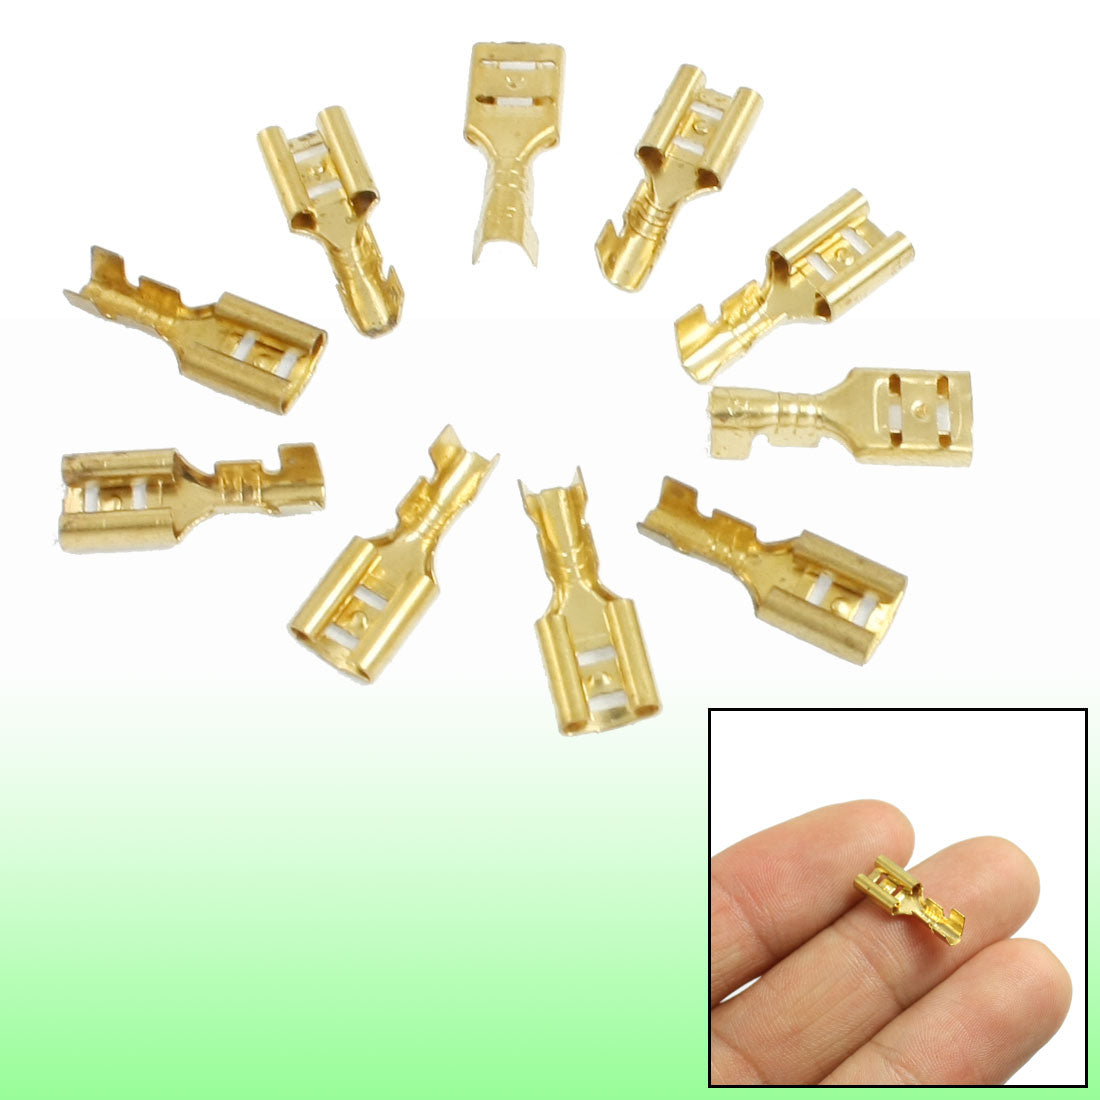 uxcell Uxcell Boat Speaker 6.5mm Female Spade Terminal Wire Connector 10 Pcs